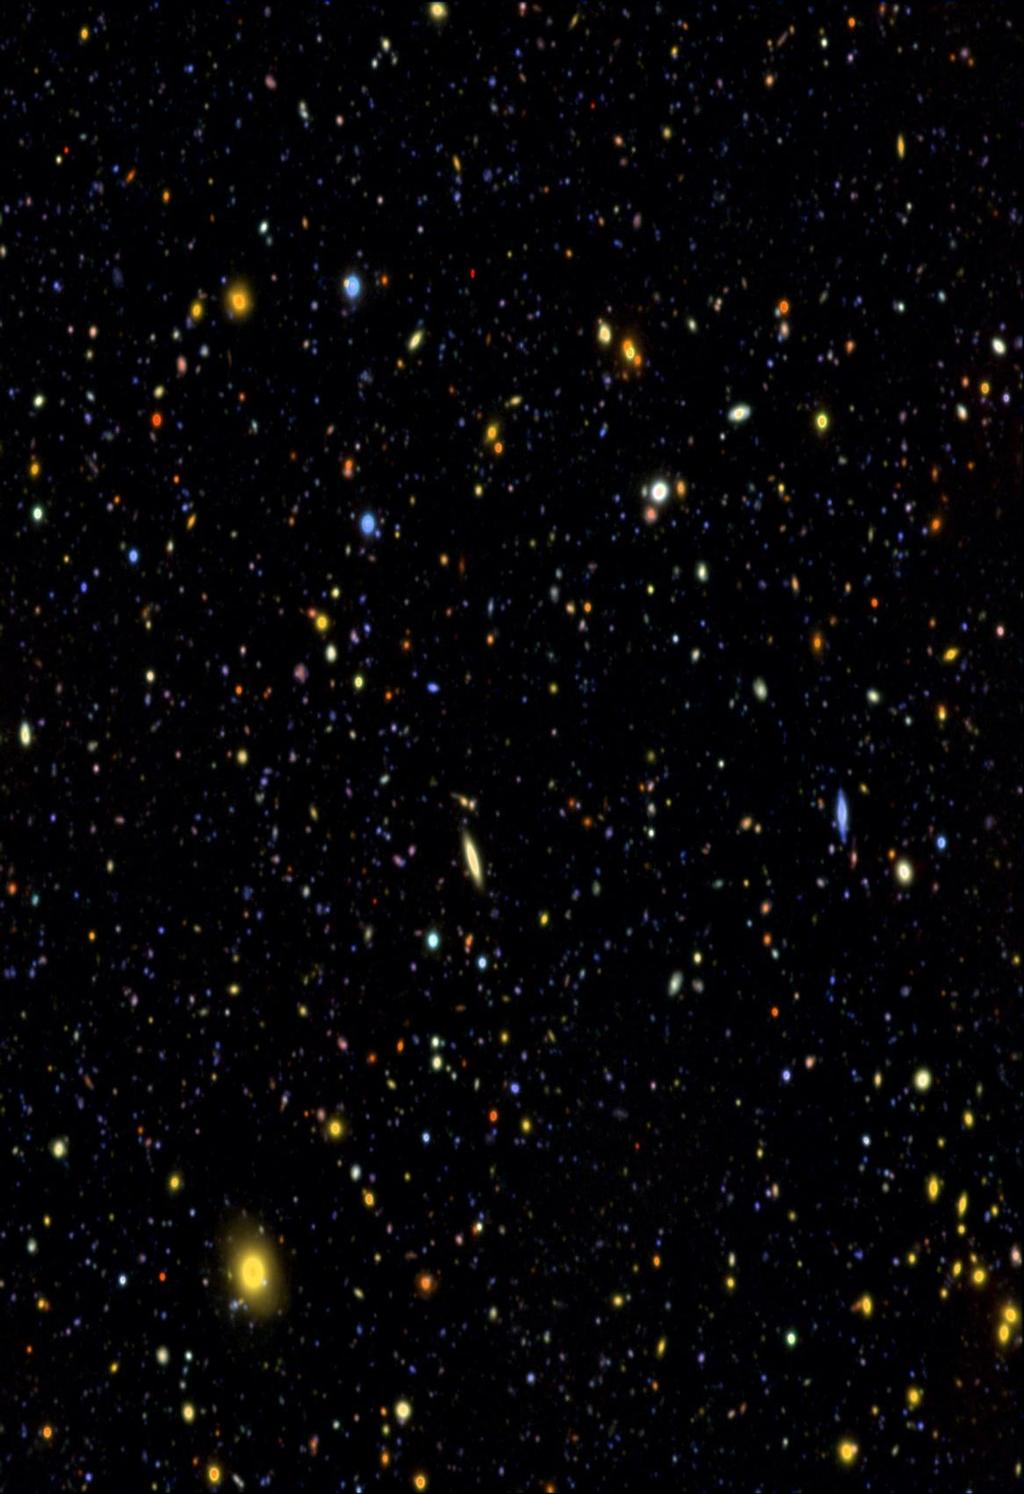 The Hubble Deep Field picture shows thousands of